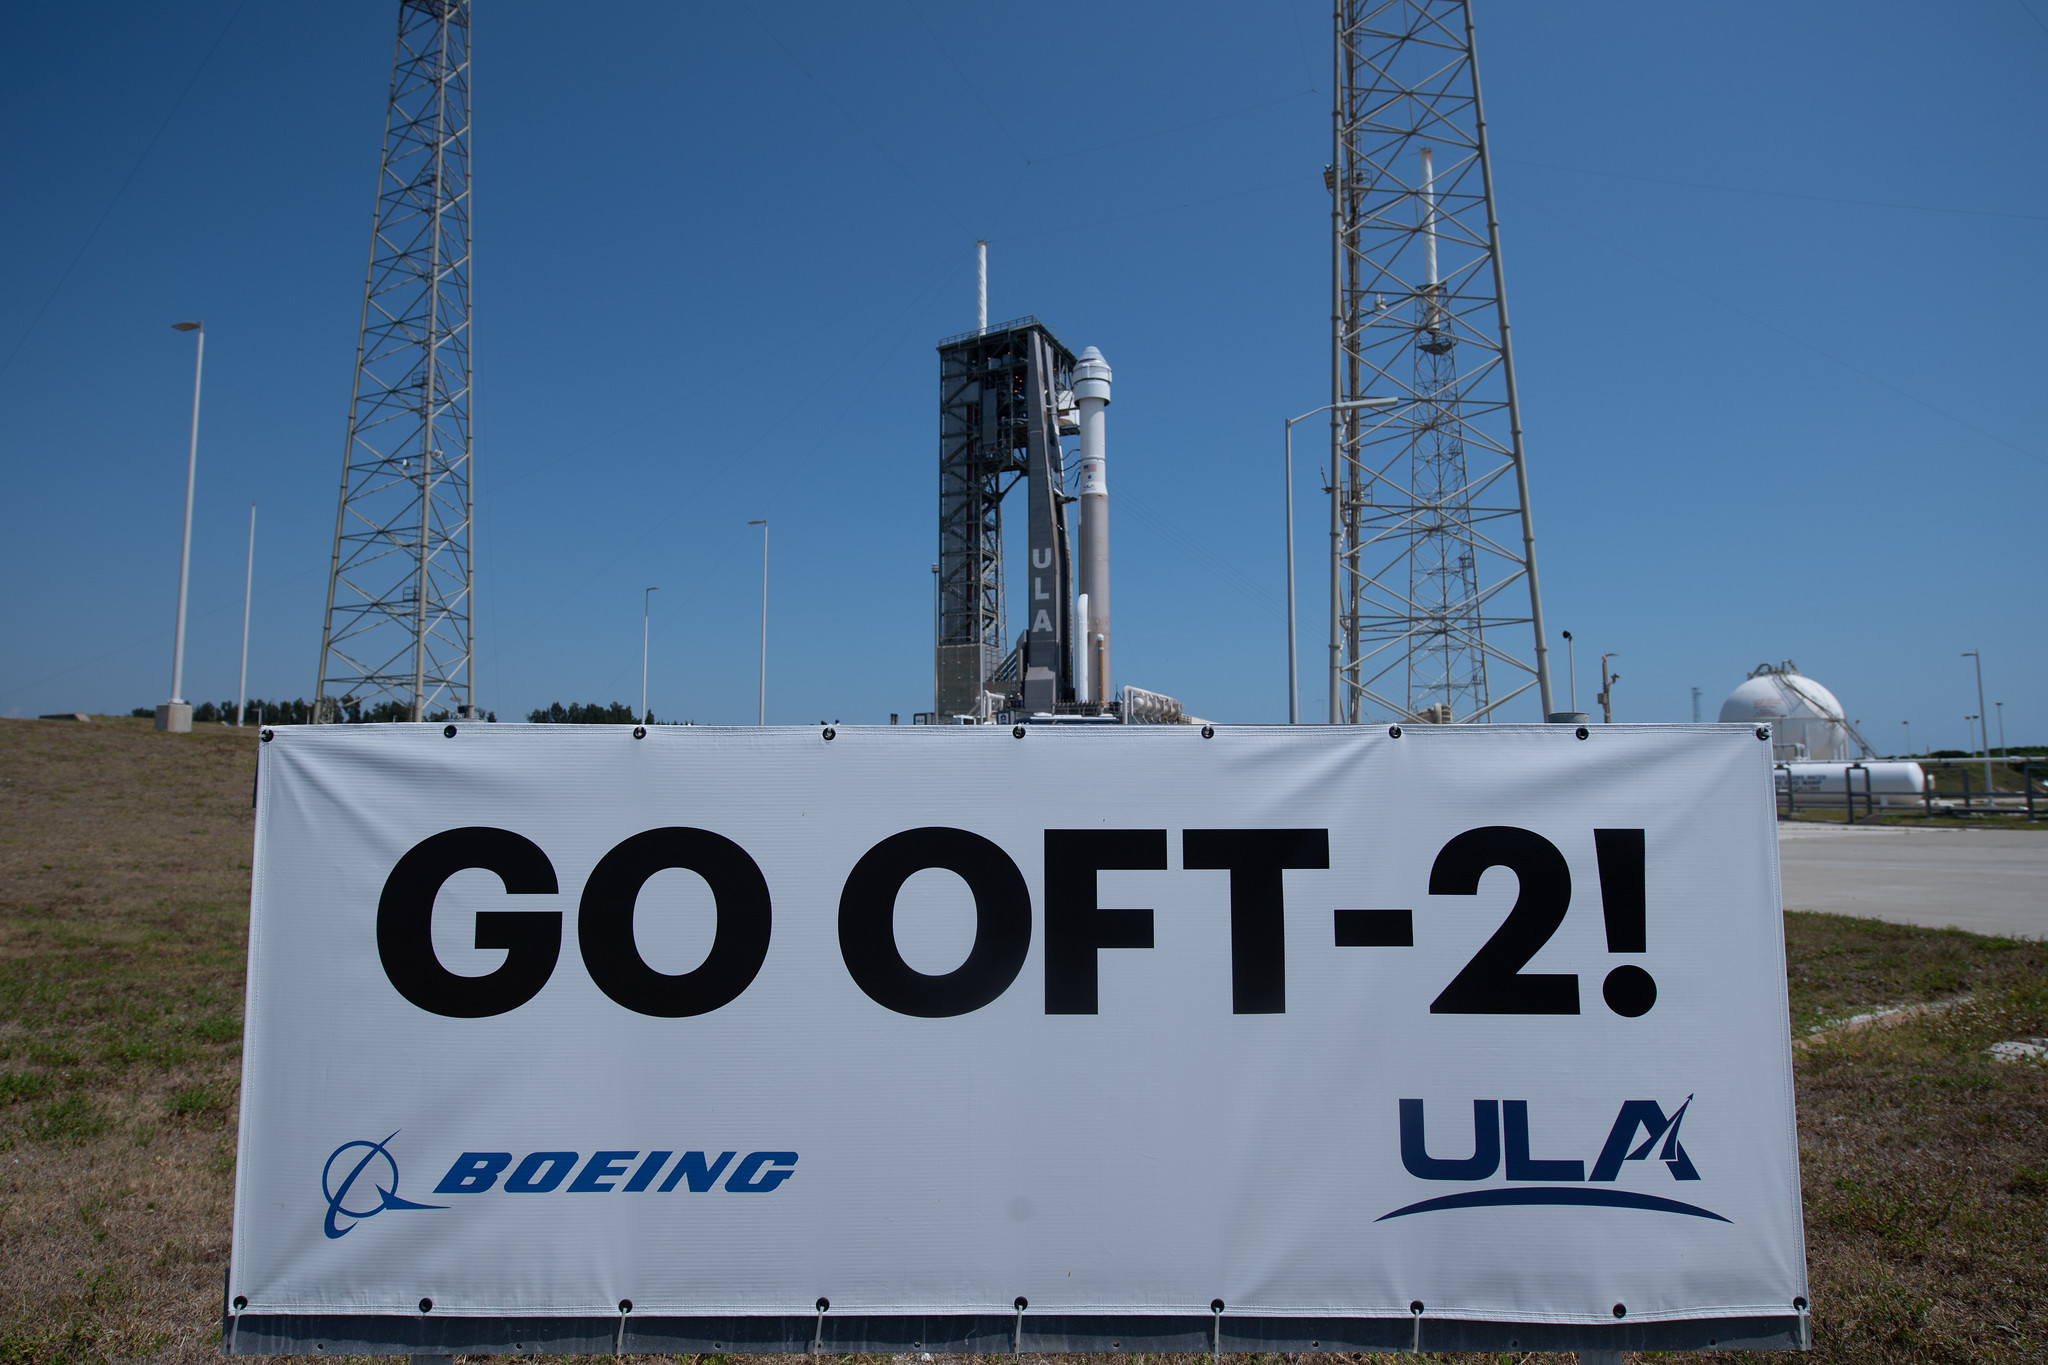 Boeing's Starliner OFT-2 spacecraft and its Atlas V rocket taxi to the launch pad on May 18, 2022.